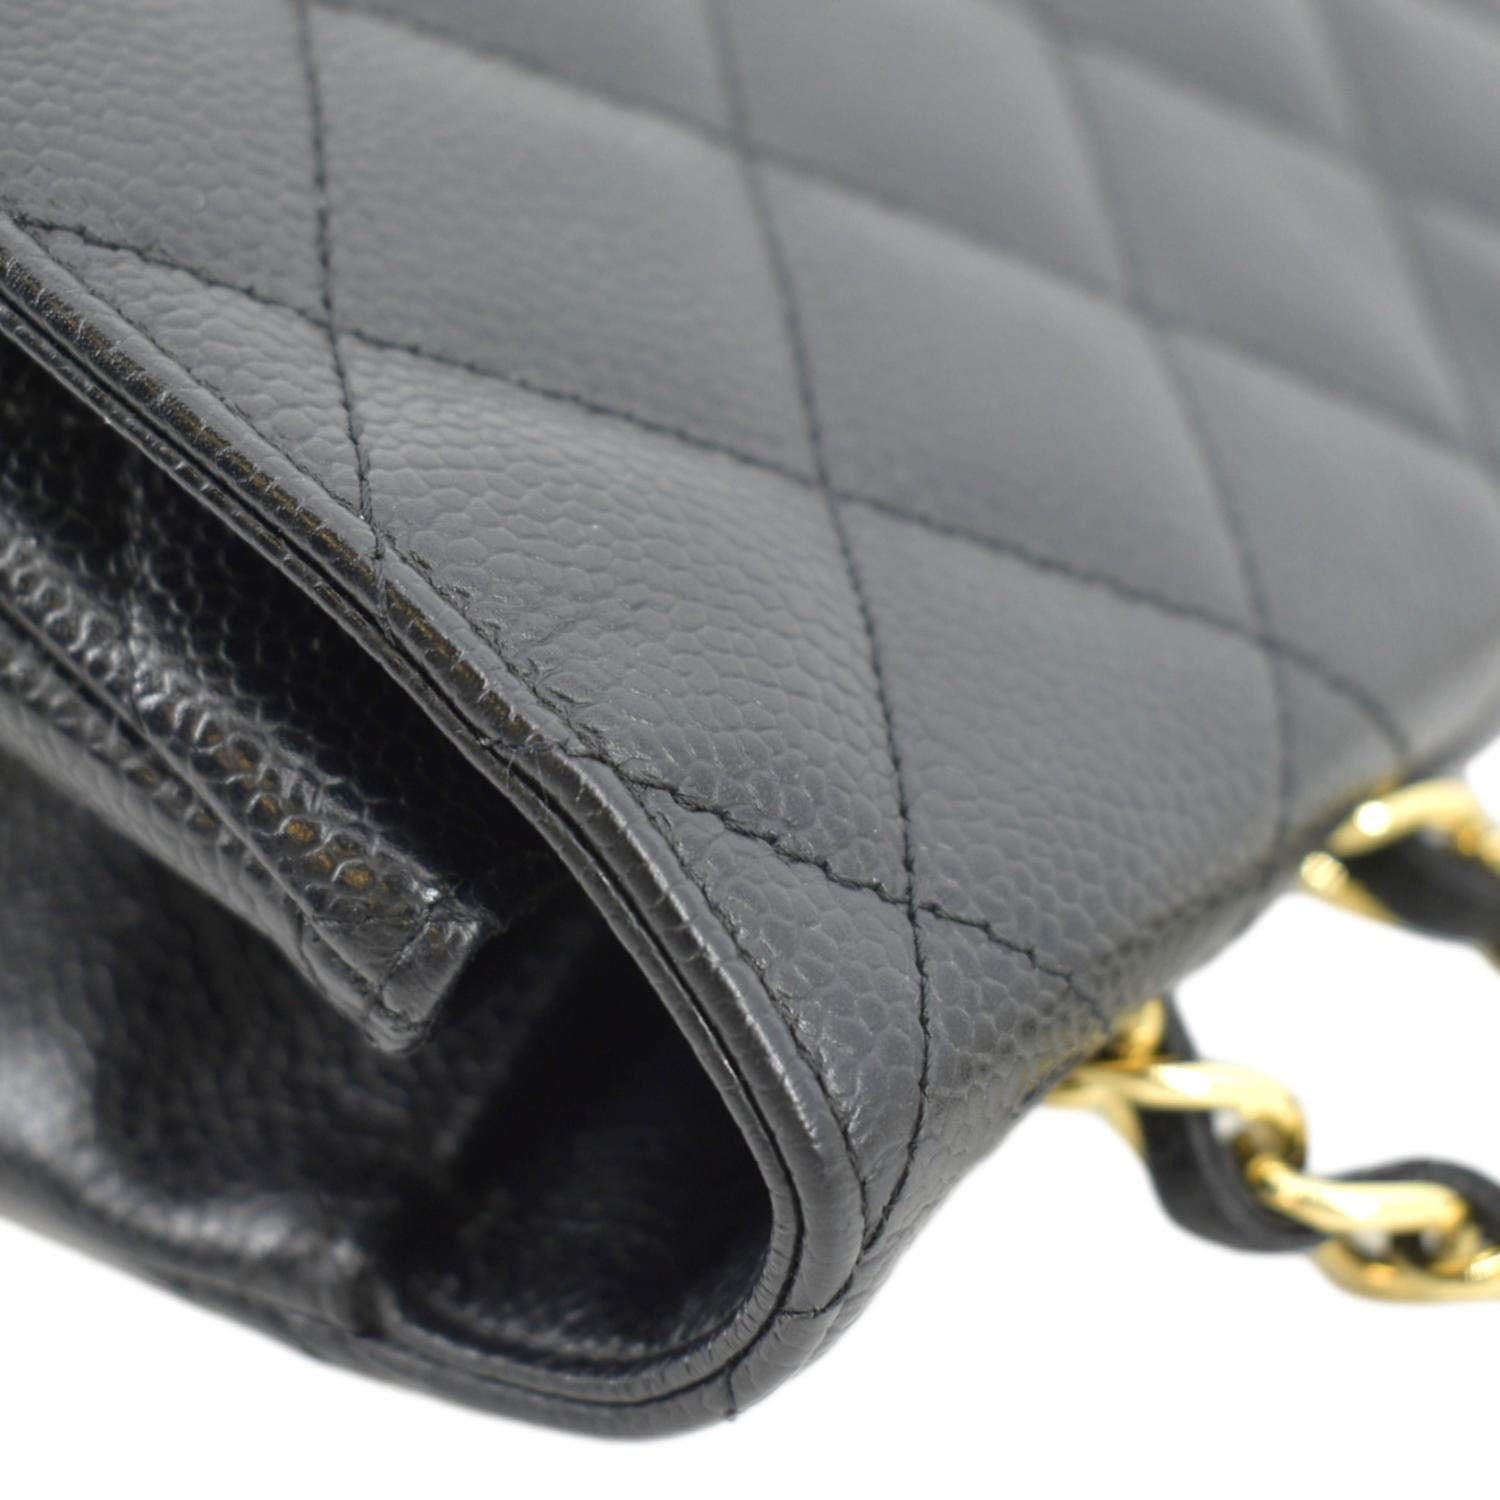 CHANEL Classic Jumbo Single Flap Quilted Caviar Leather Shoulder Bag B